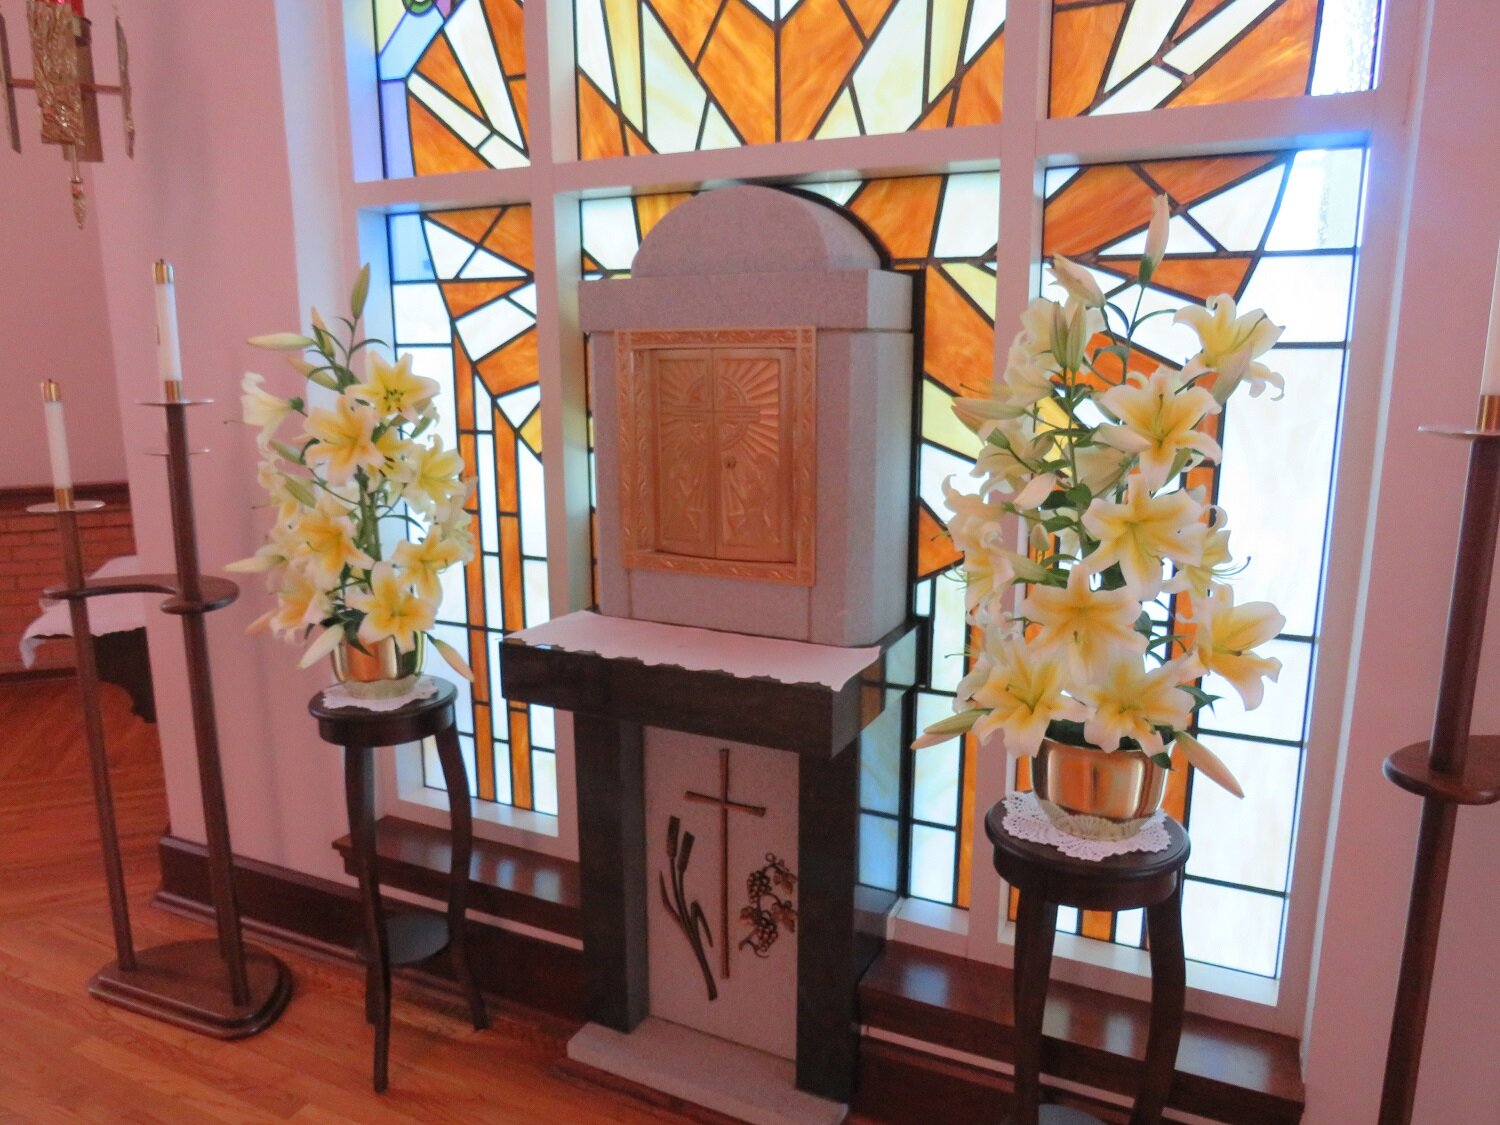  These giant, fragrant yellow lilies appeared in the sanctuary for the feast of Sts. Peter and Paul … 